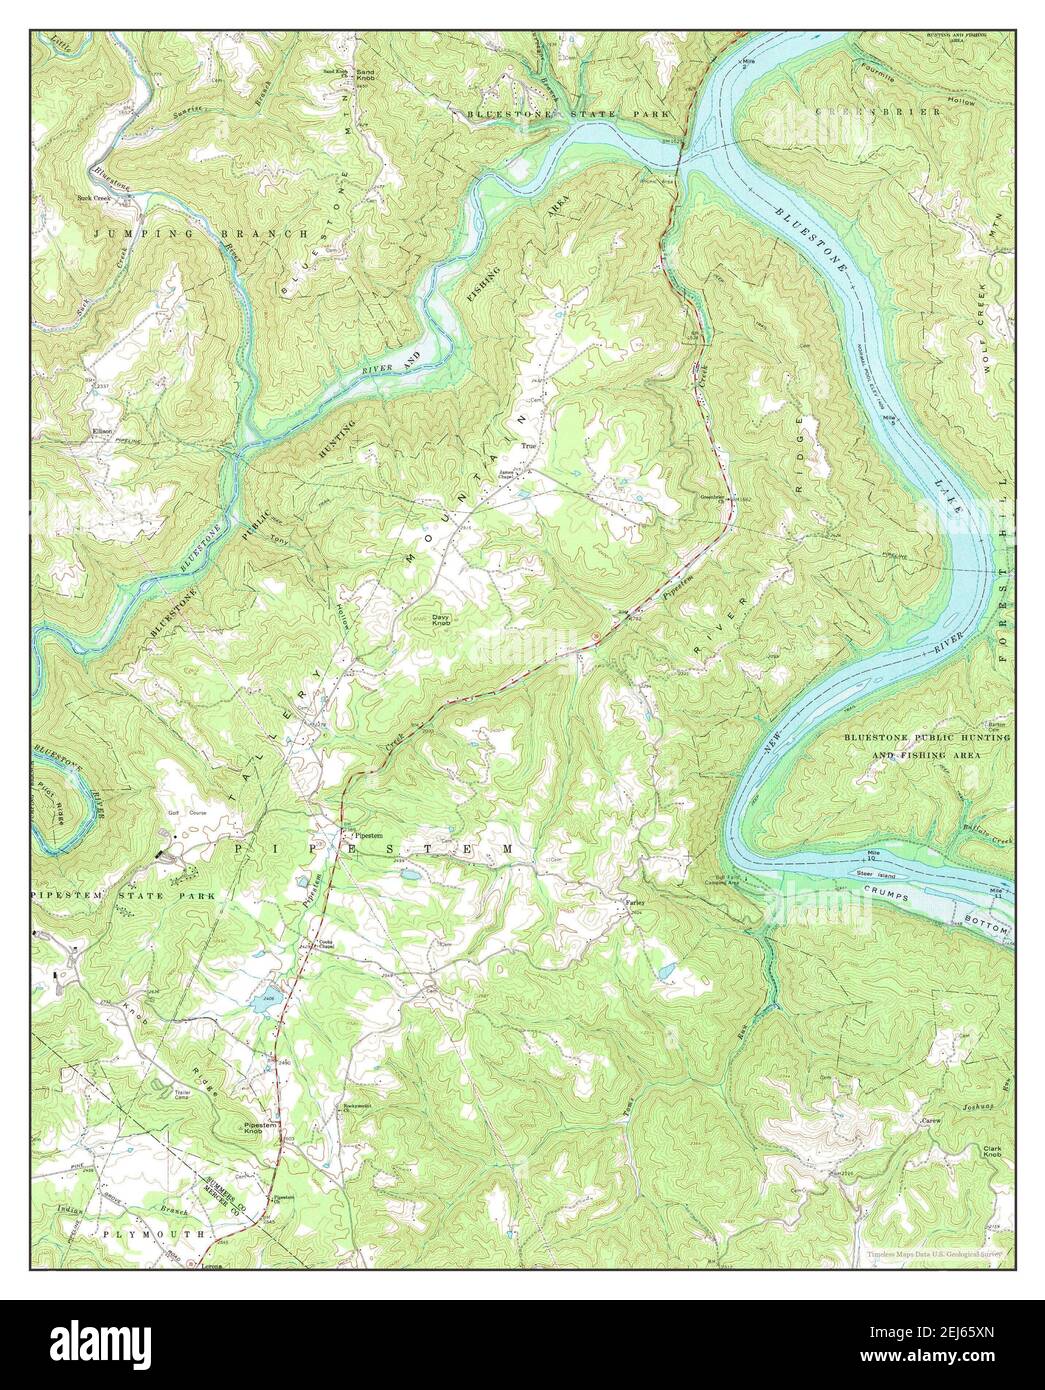 Pipestem, West Virginia, map 1968, 1:24000, United States of America by Timeless Maps, data U.S. Geological Survey Stock Photo